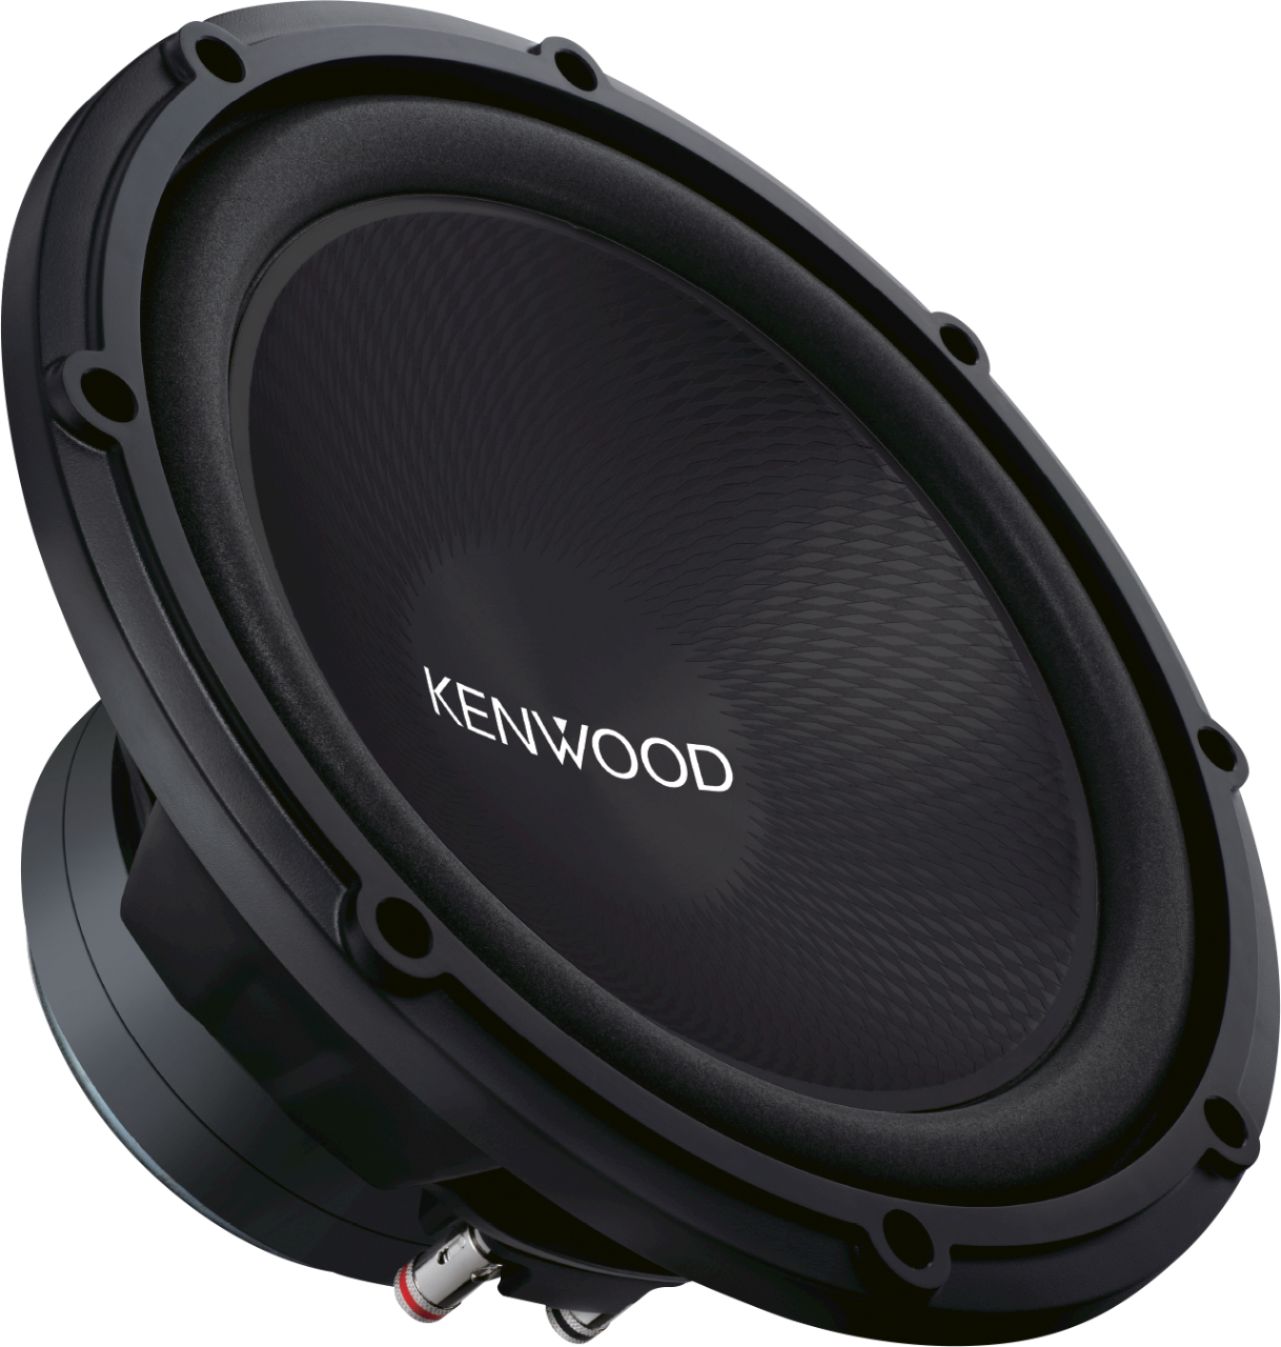 Angle View: Kenwood - Road Series 12" Single-Voice-Coil 4-Ohm Subwoofer - Black